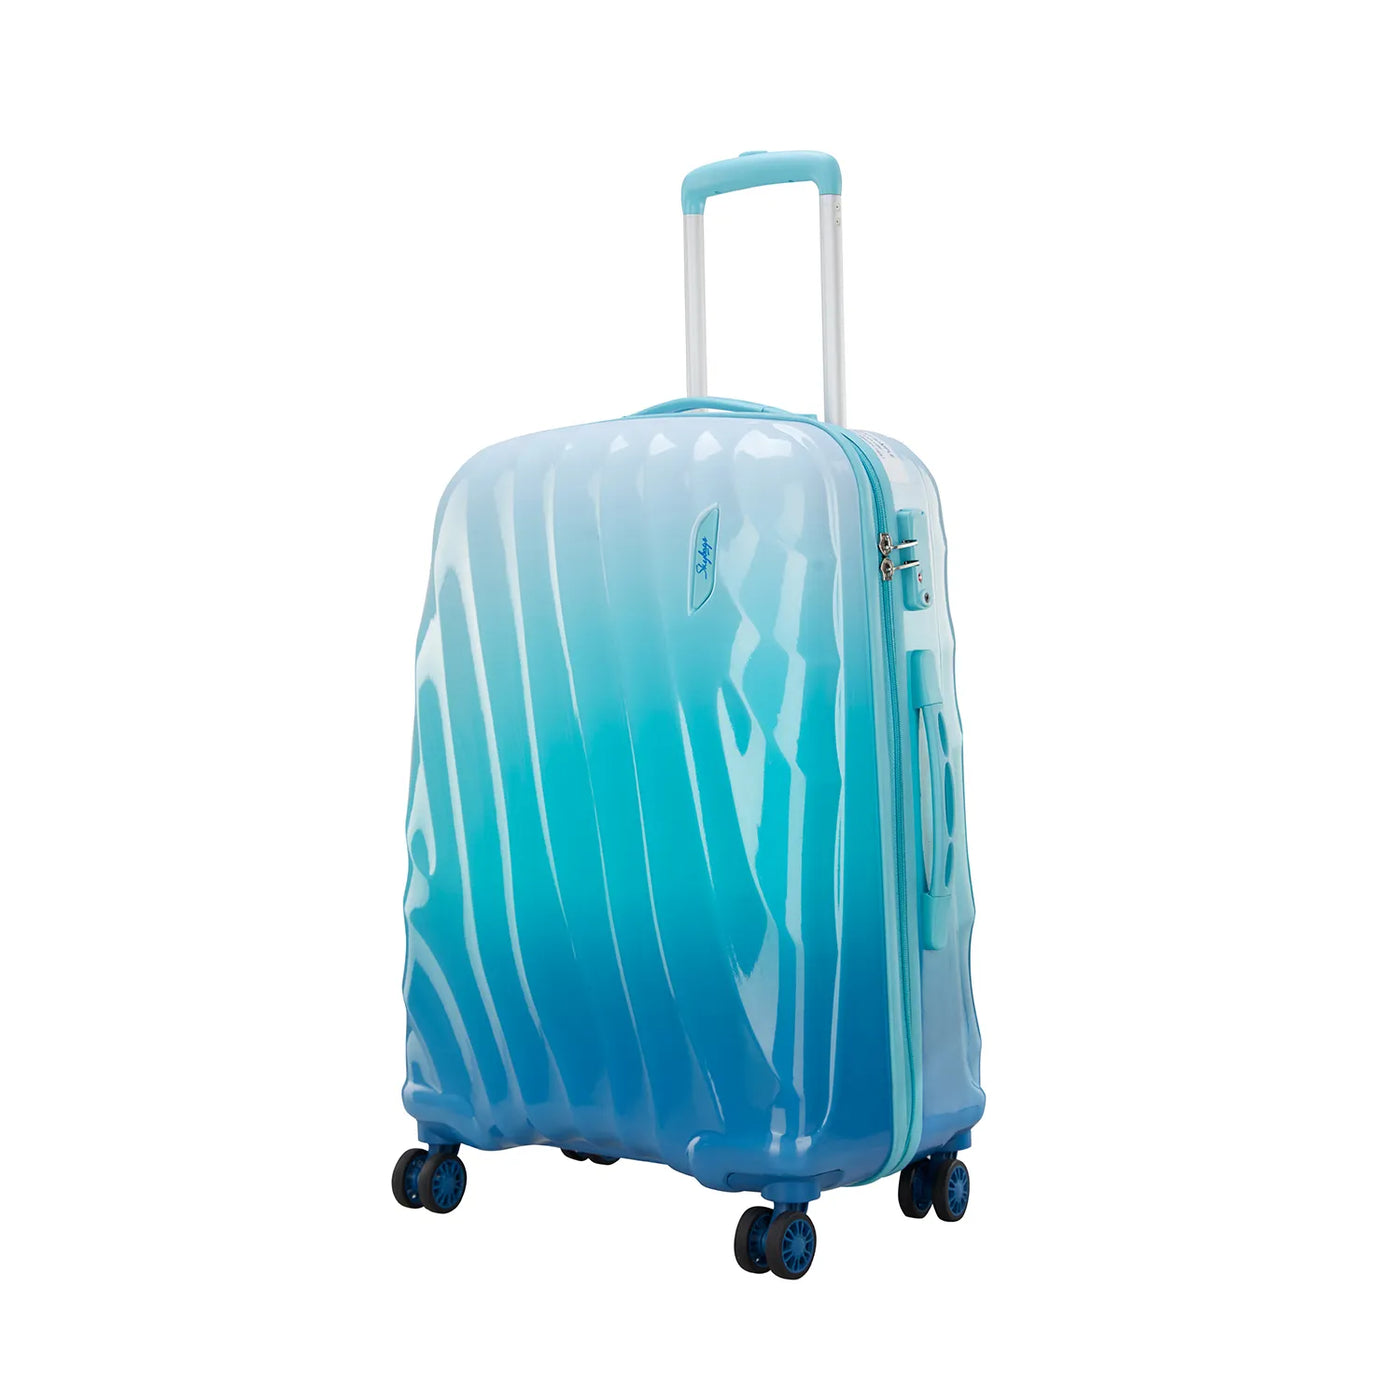 25 Best Collection of Trolley Bags for Travel Needs